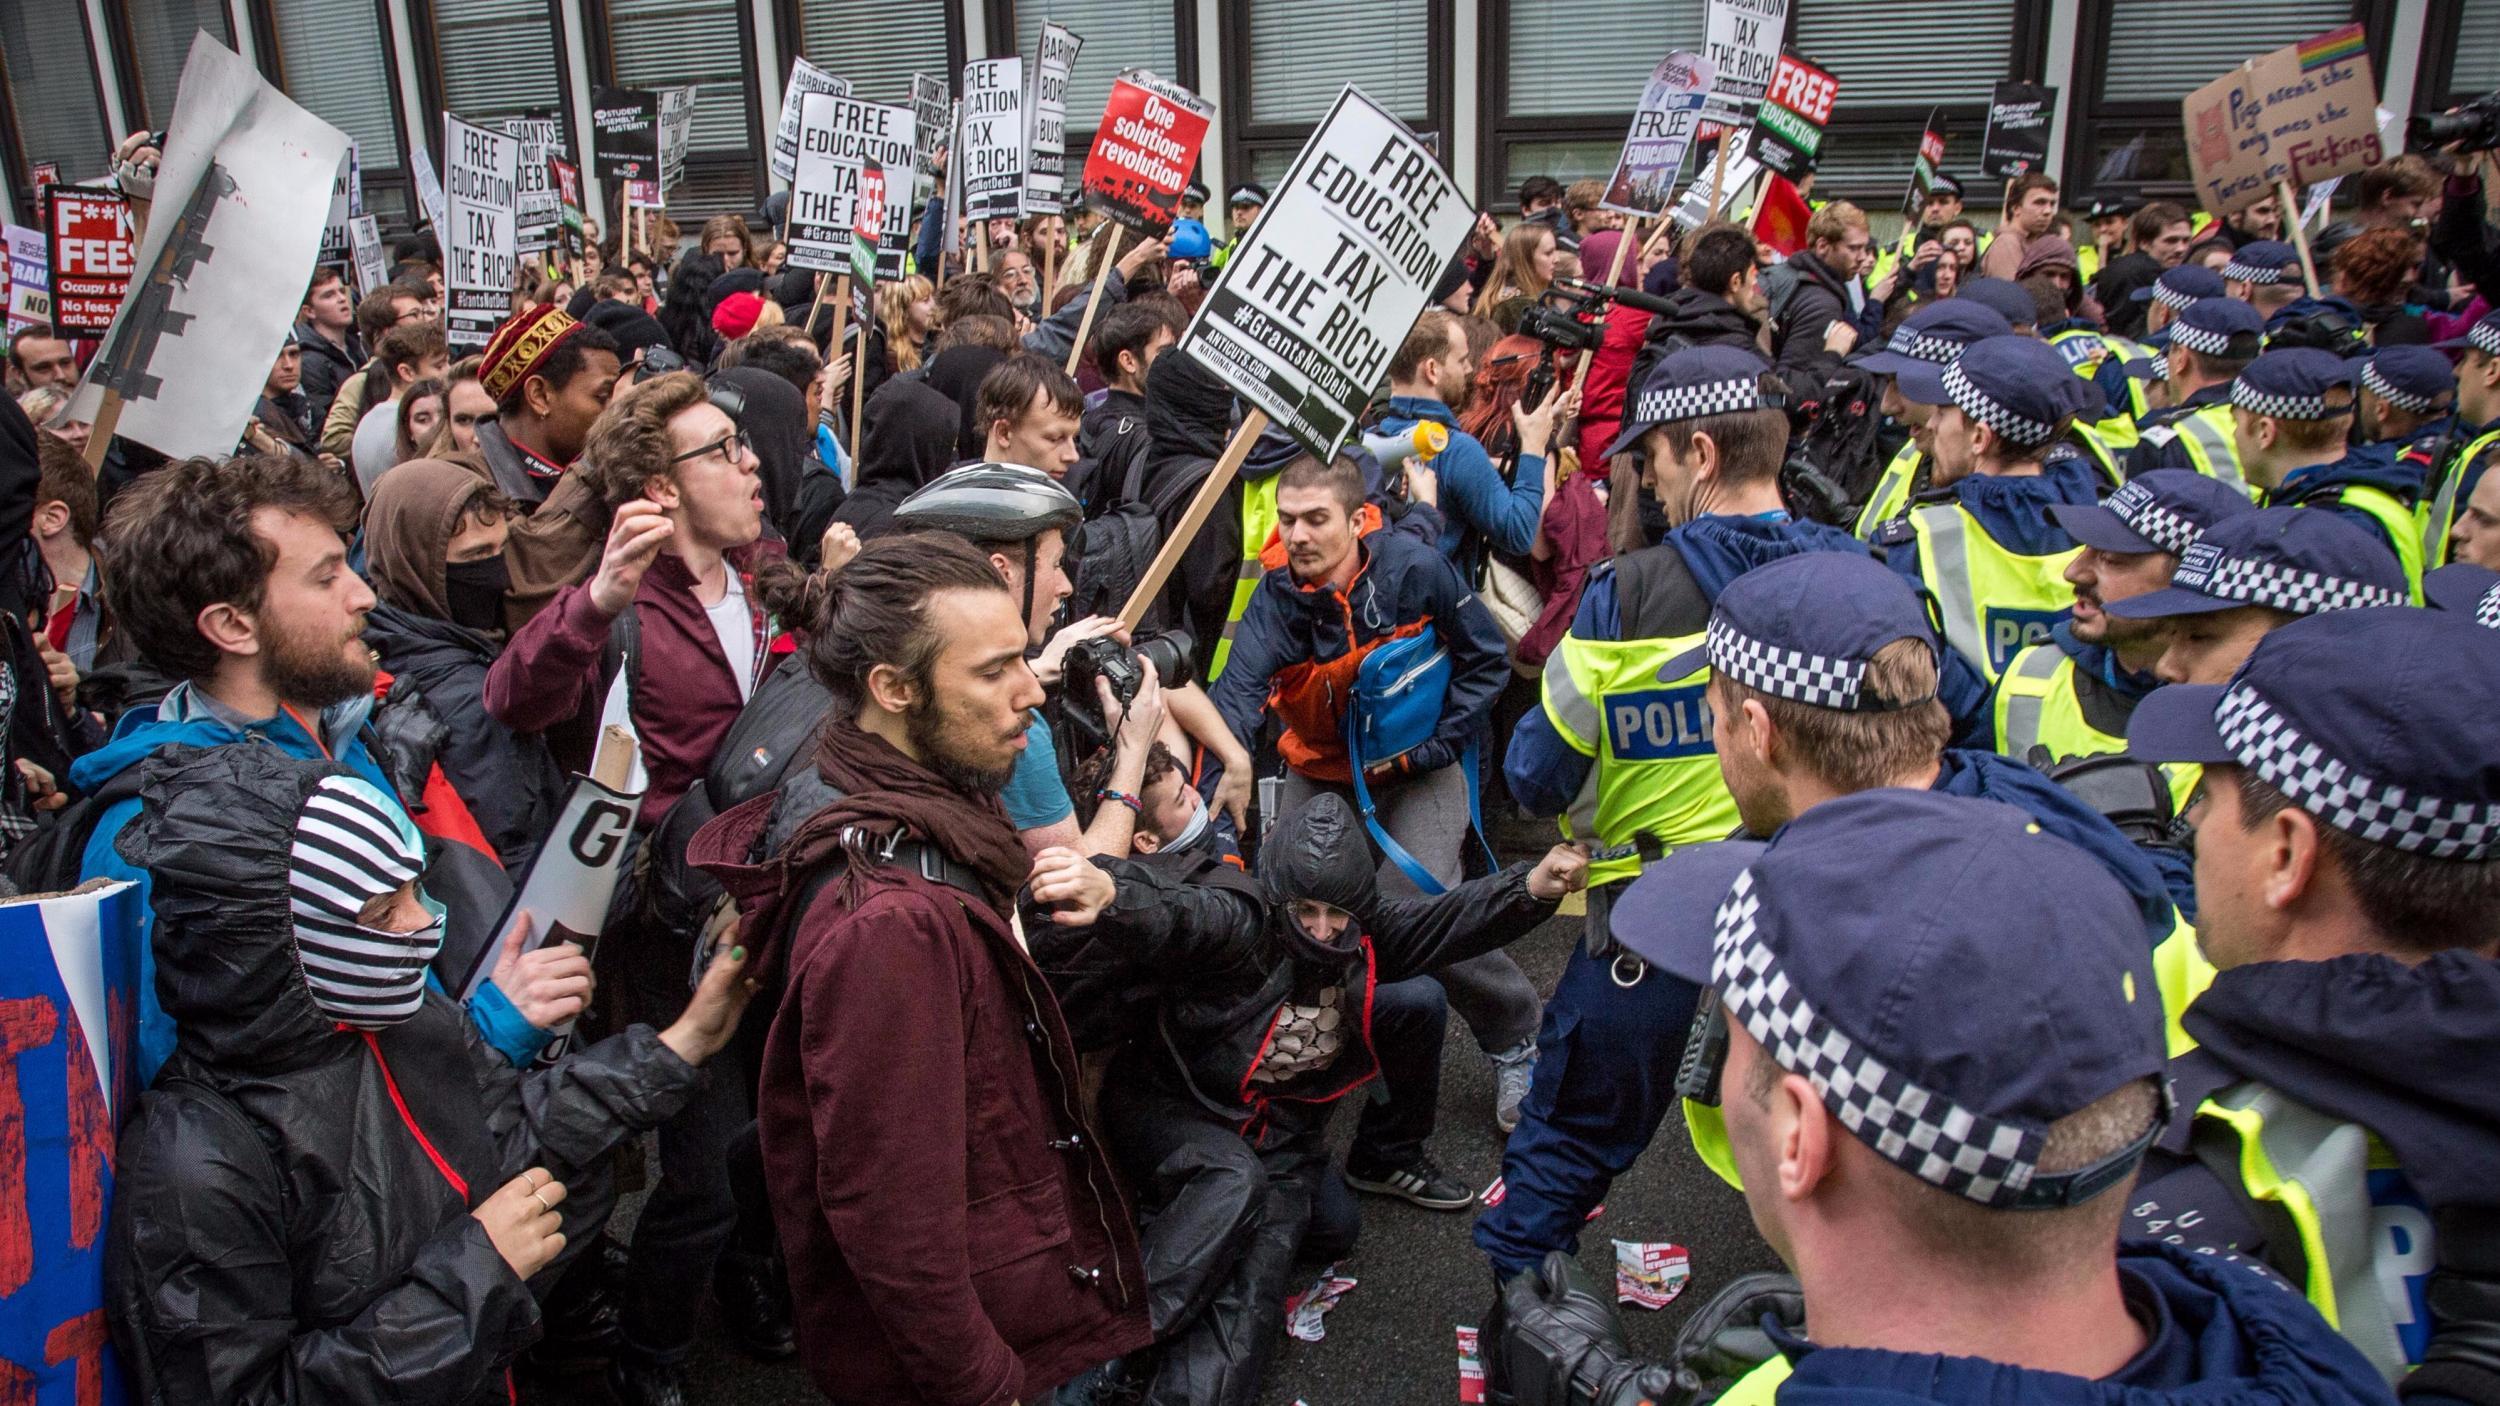 Students and graduates have clashed with police in London several times in recent years over the rising cost of debt associated with higher education